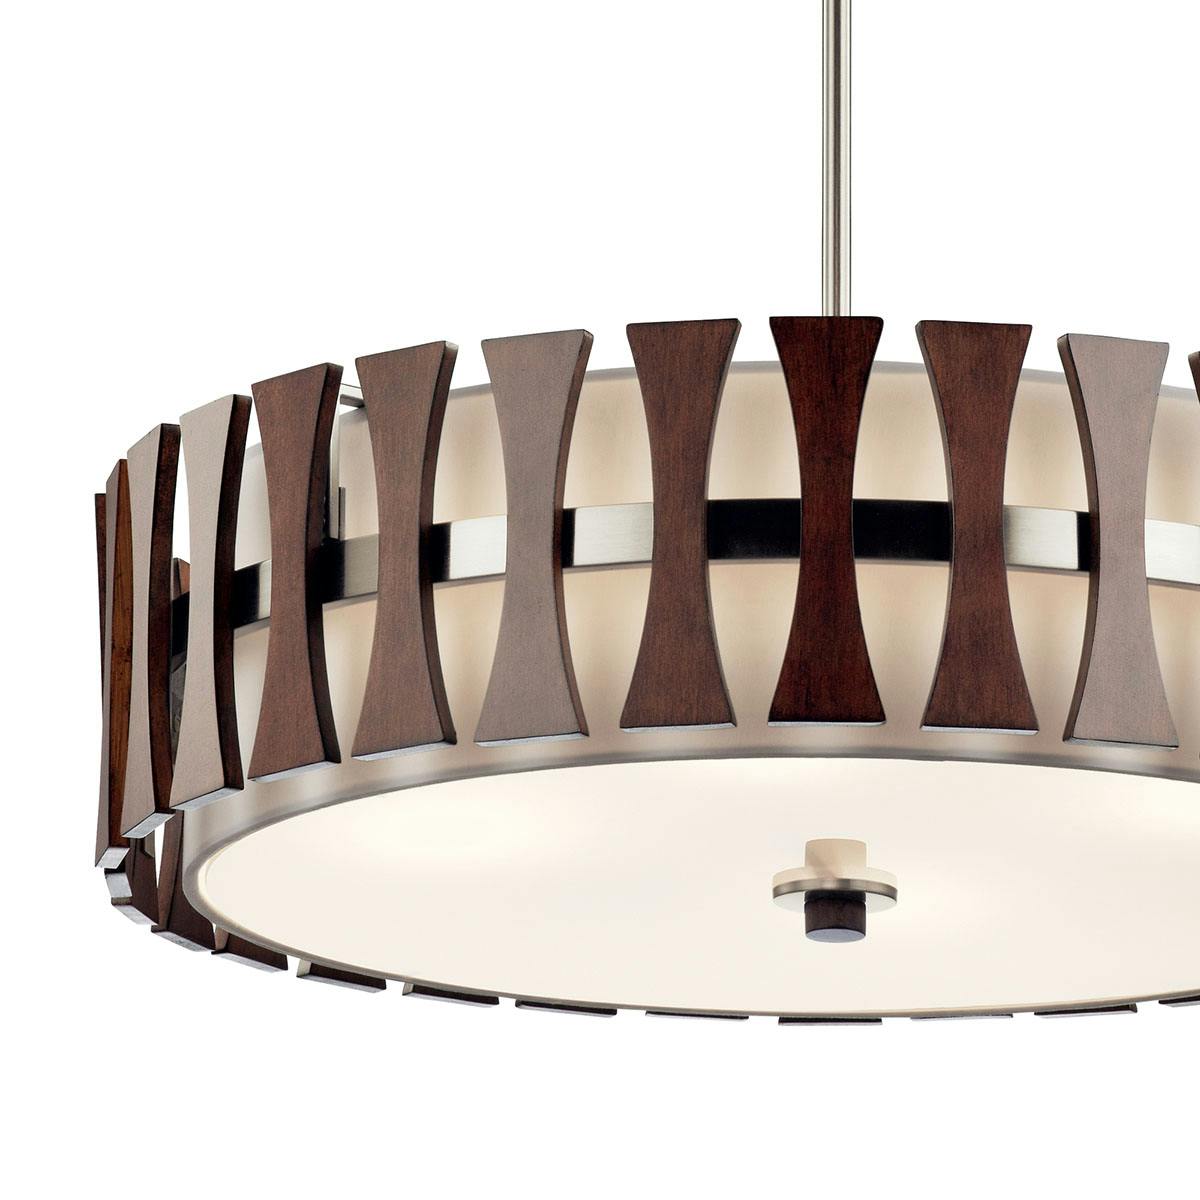 Close up view of the Cirus 4 light Convertible Pendant Auburn on a white background